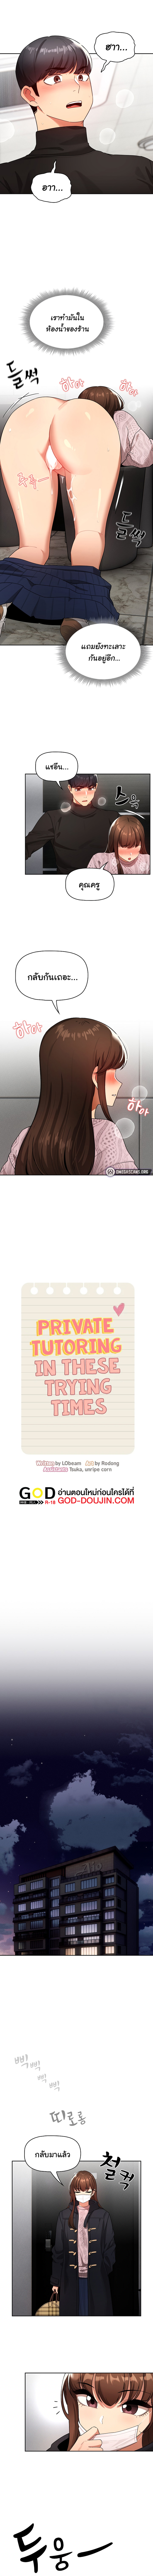 Private Tutoring in These Trying Times07